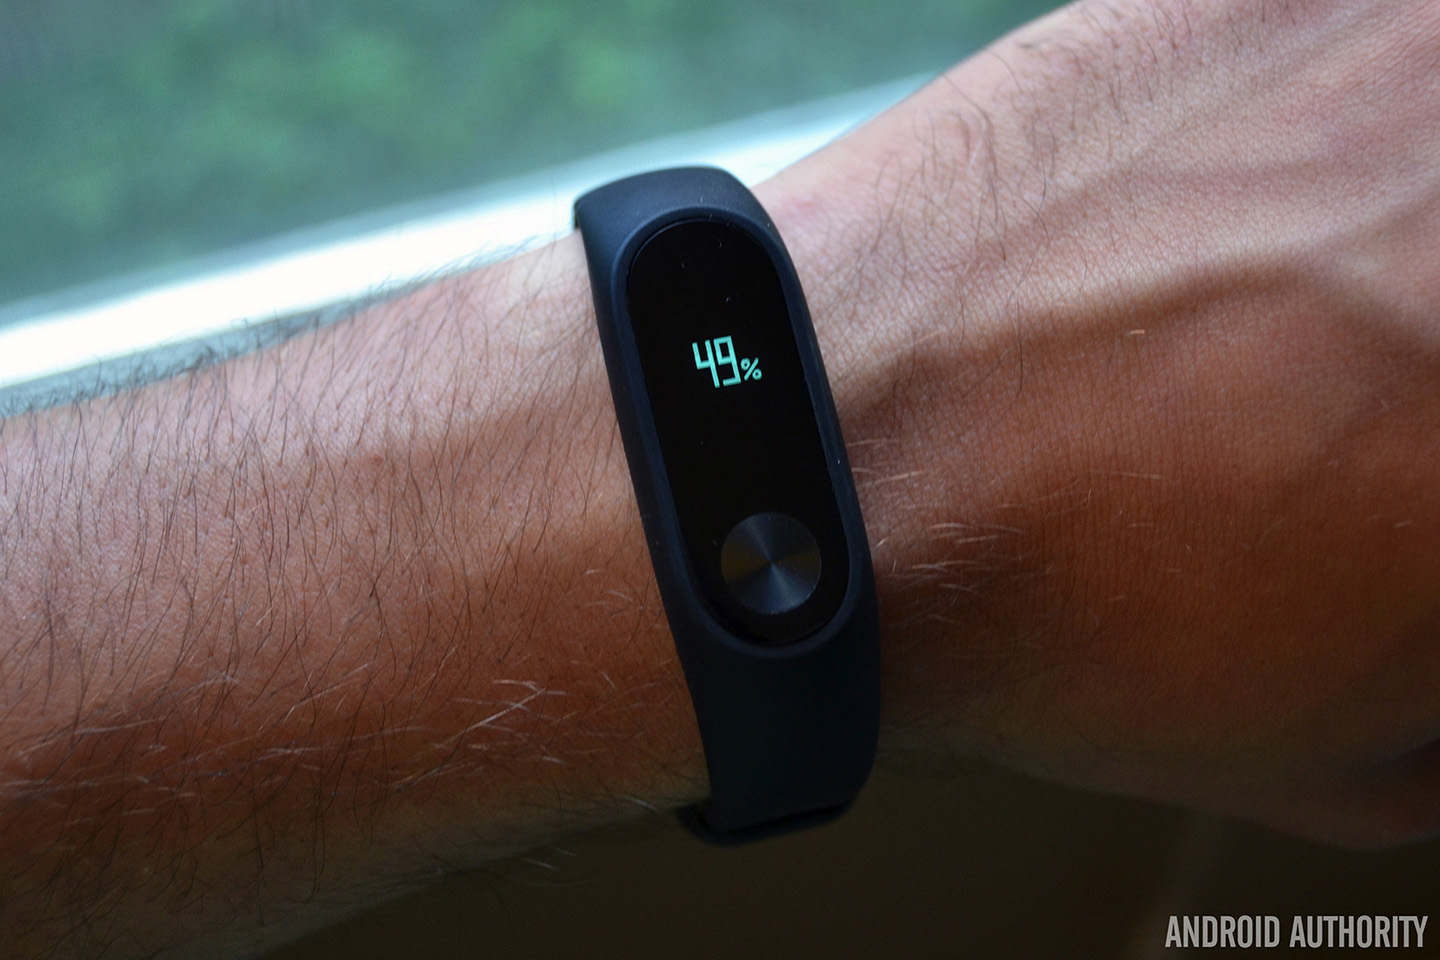 The Xiaomi Mi Band 2 fitness band.